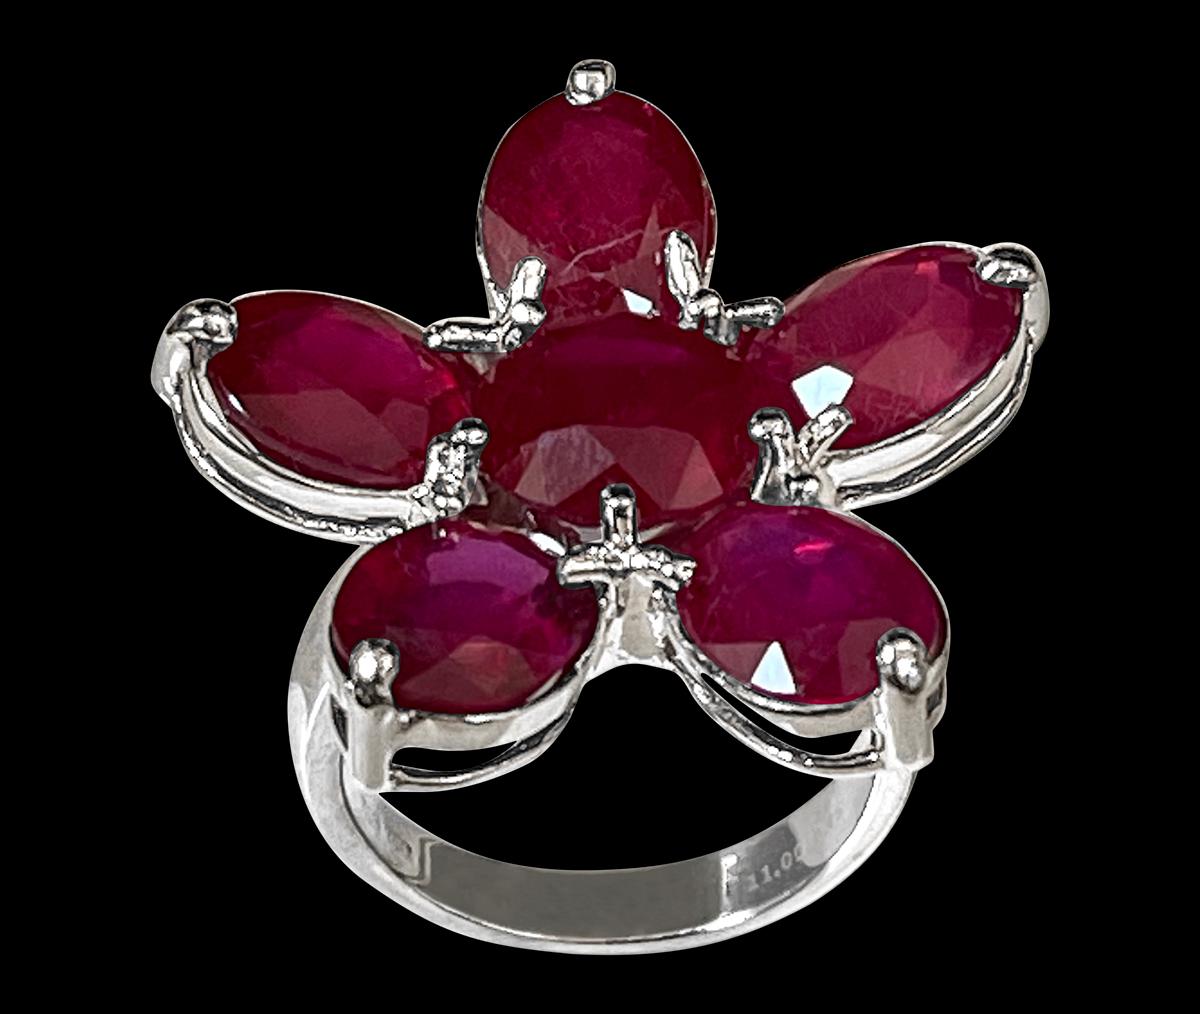 Approximately 15 Carat Treated Ruby Big Flower Cocktail Ring In 18 Karat White Gold  Size 6.5
 prong set
18 K White Gold: 10.7  gram with stone
Stamped 750
Ring Size 6.5 ( can be altered for no charge )
Large 5 Petals are surrounding a center Round